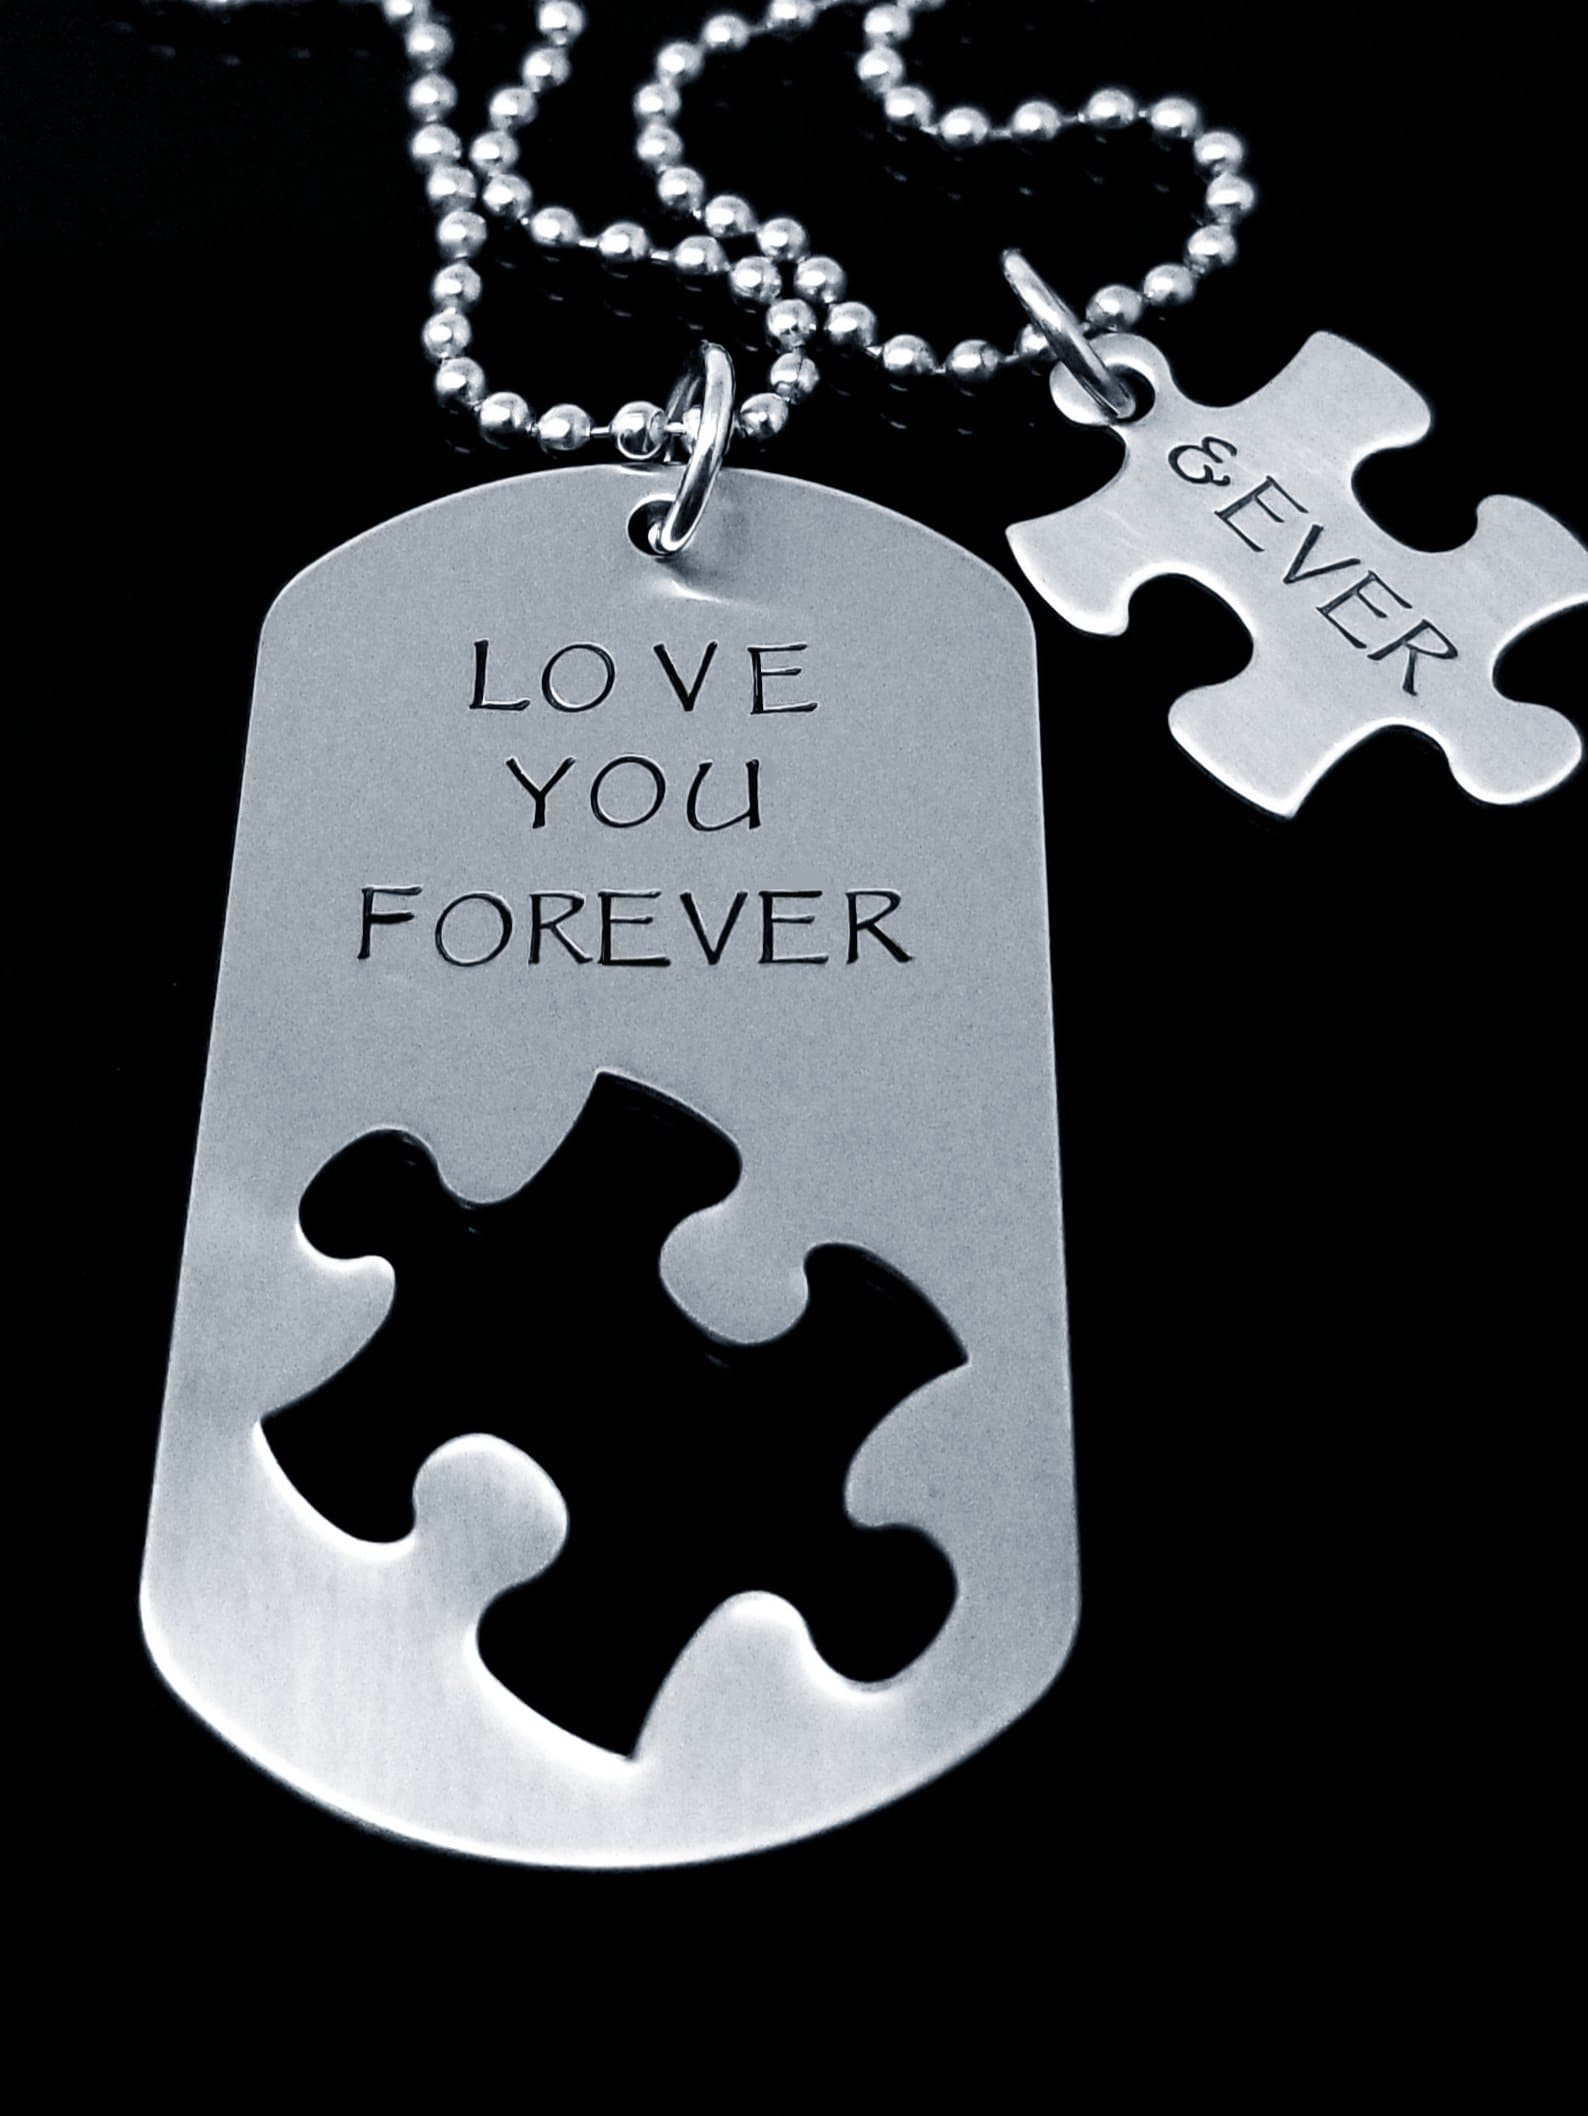 I Love You Forever & Ever Necklace Set, Puzzle Piece, Dog Tag Necklace, Boyfriend Gift, Forever, Necklaces, HandmadeLoveStories, HandmadeLoveStories , [Handmade_Love_Stories], [Hand_Stamped_Jewelry], [Etsy_Stamped_Jewelry], [Etsy_Jewelry]